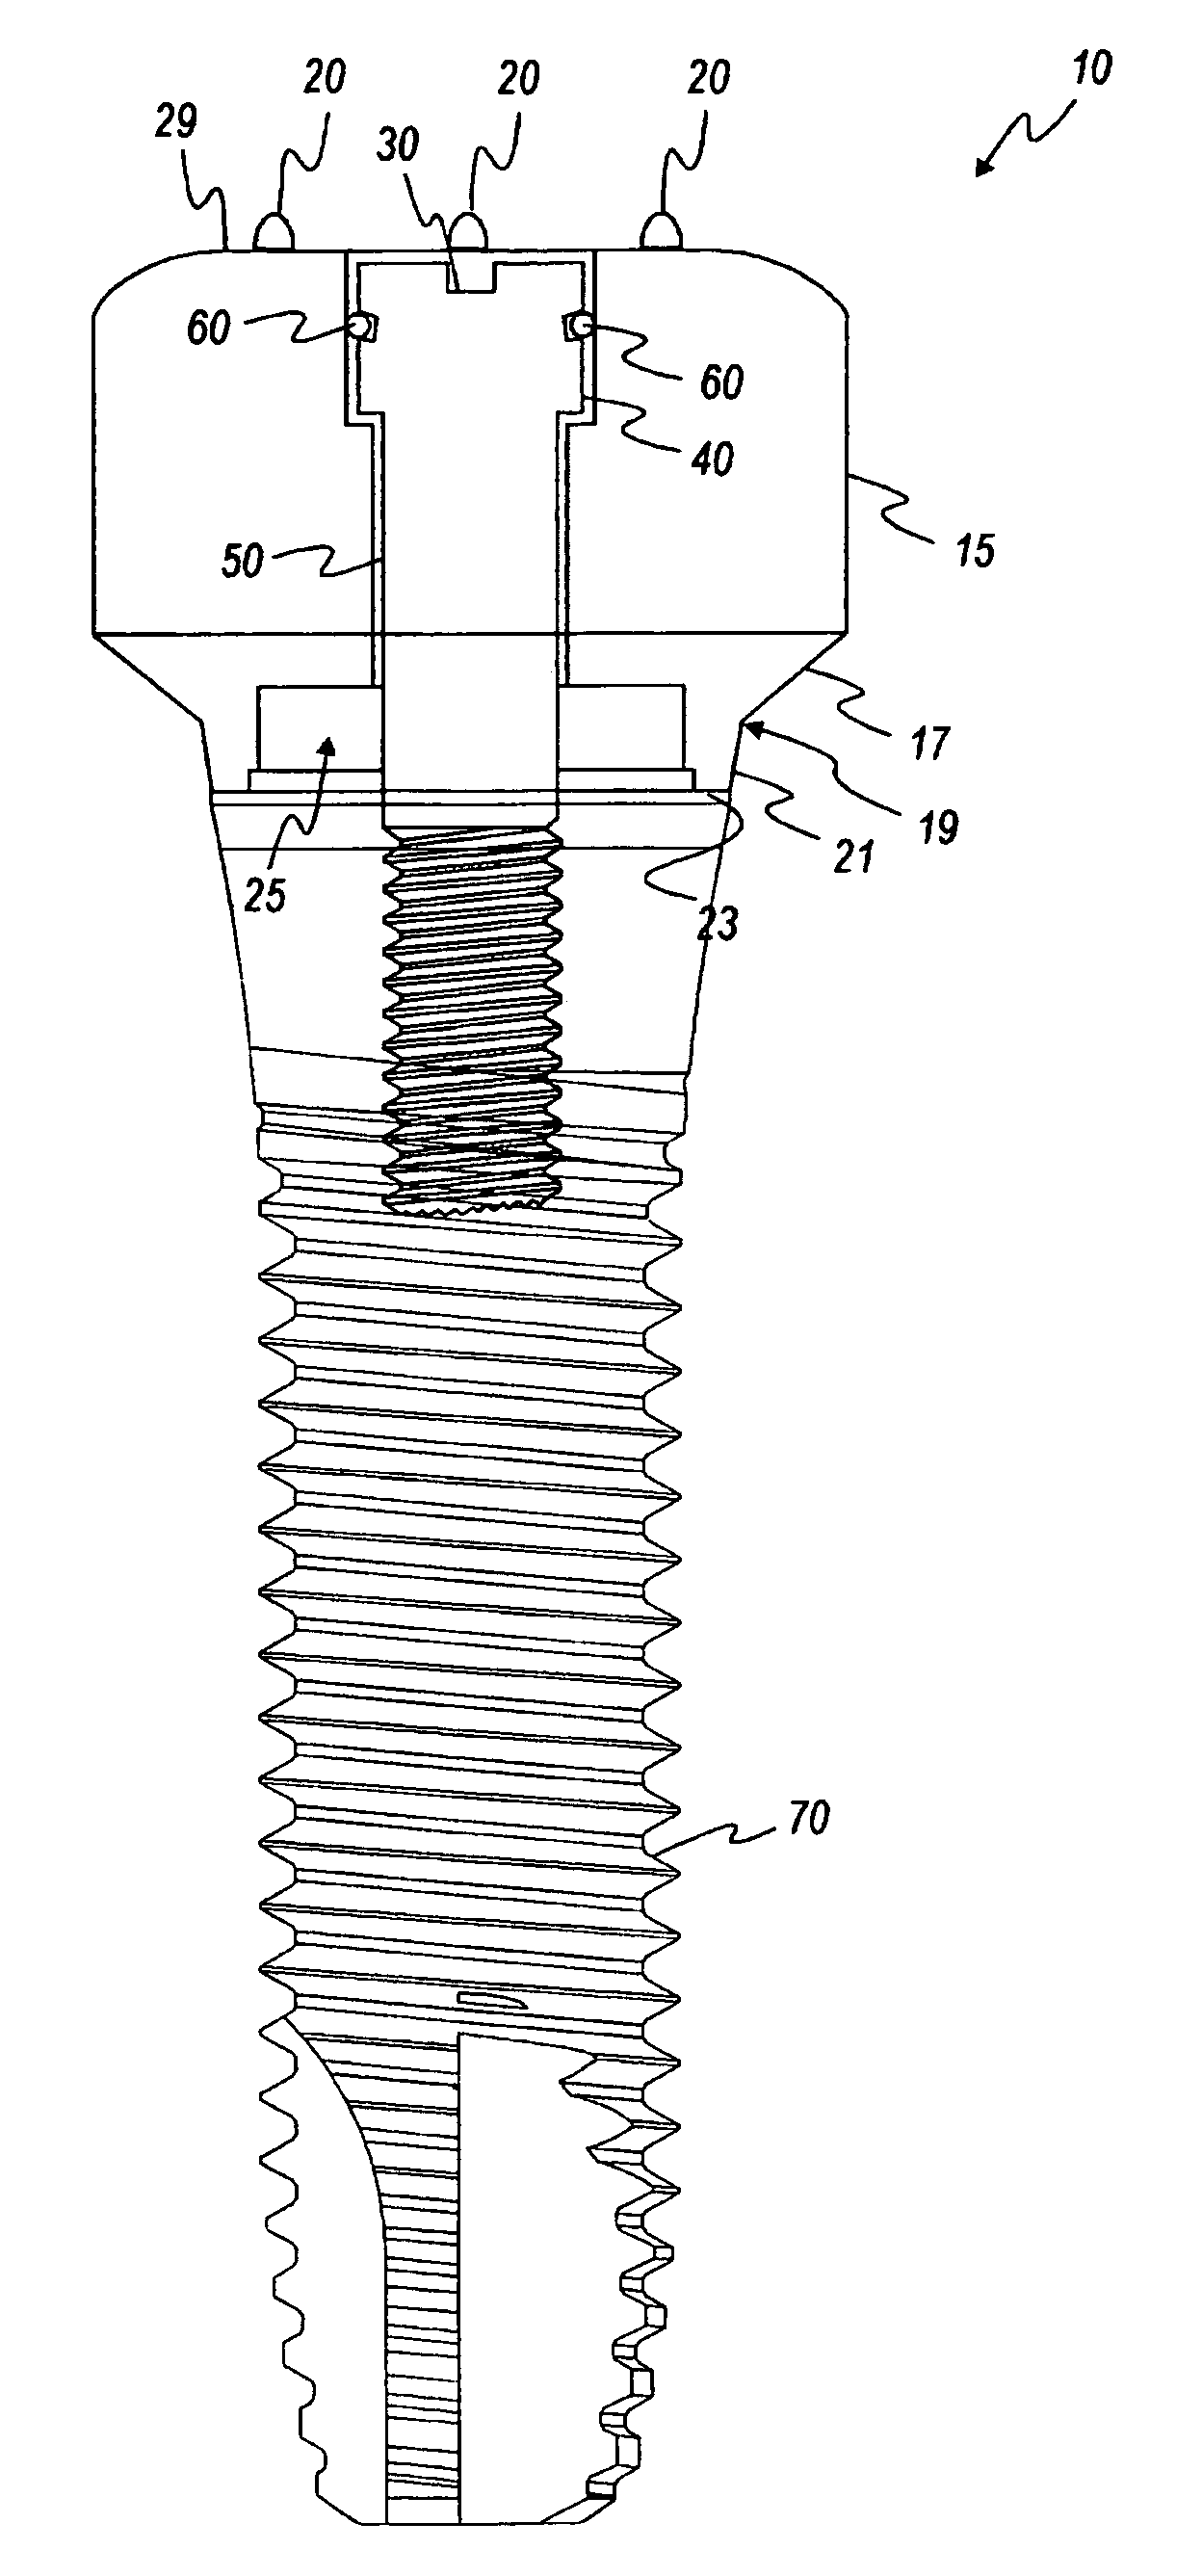 Healing components for use in taking impressions and methods for making the same